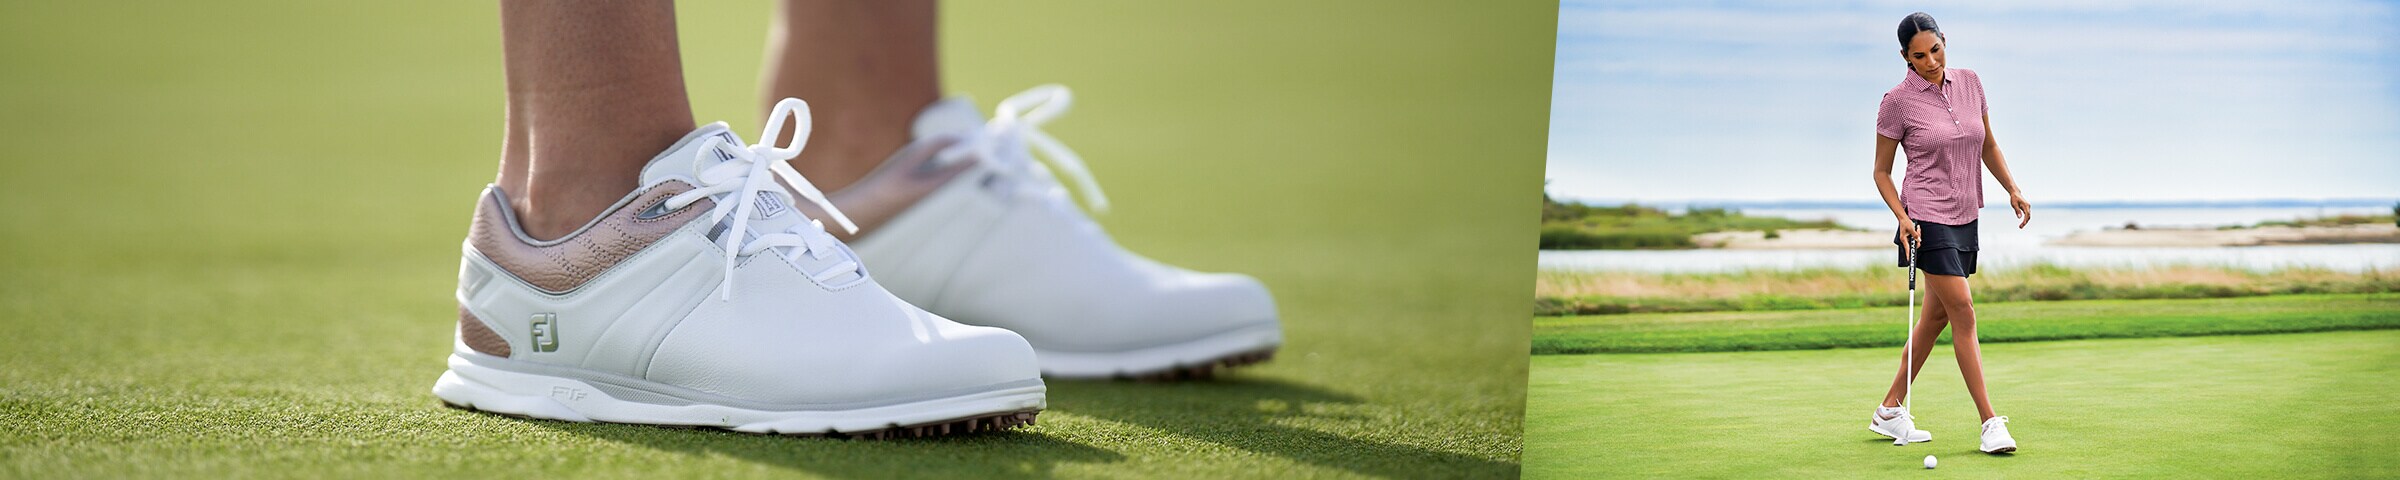 FootJoy New Pro|SL Spikeless Golf Shoes